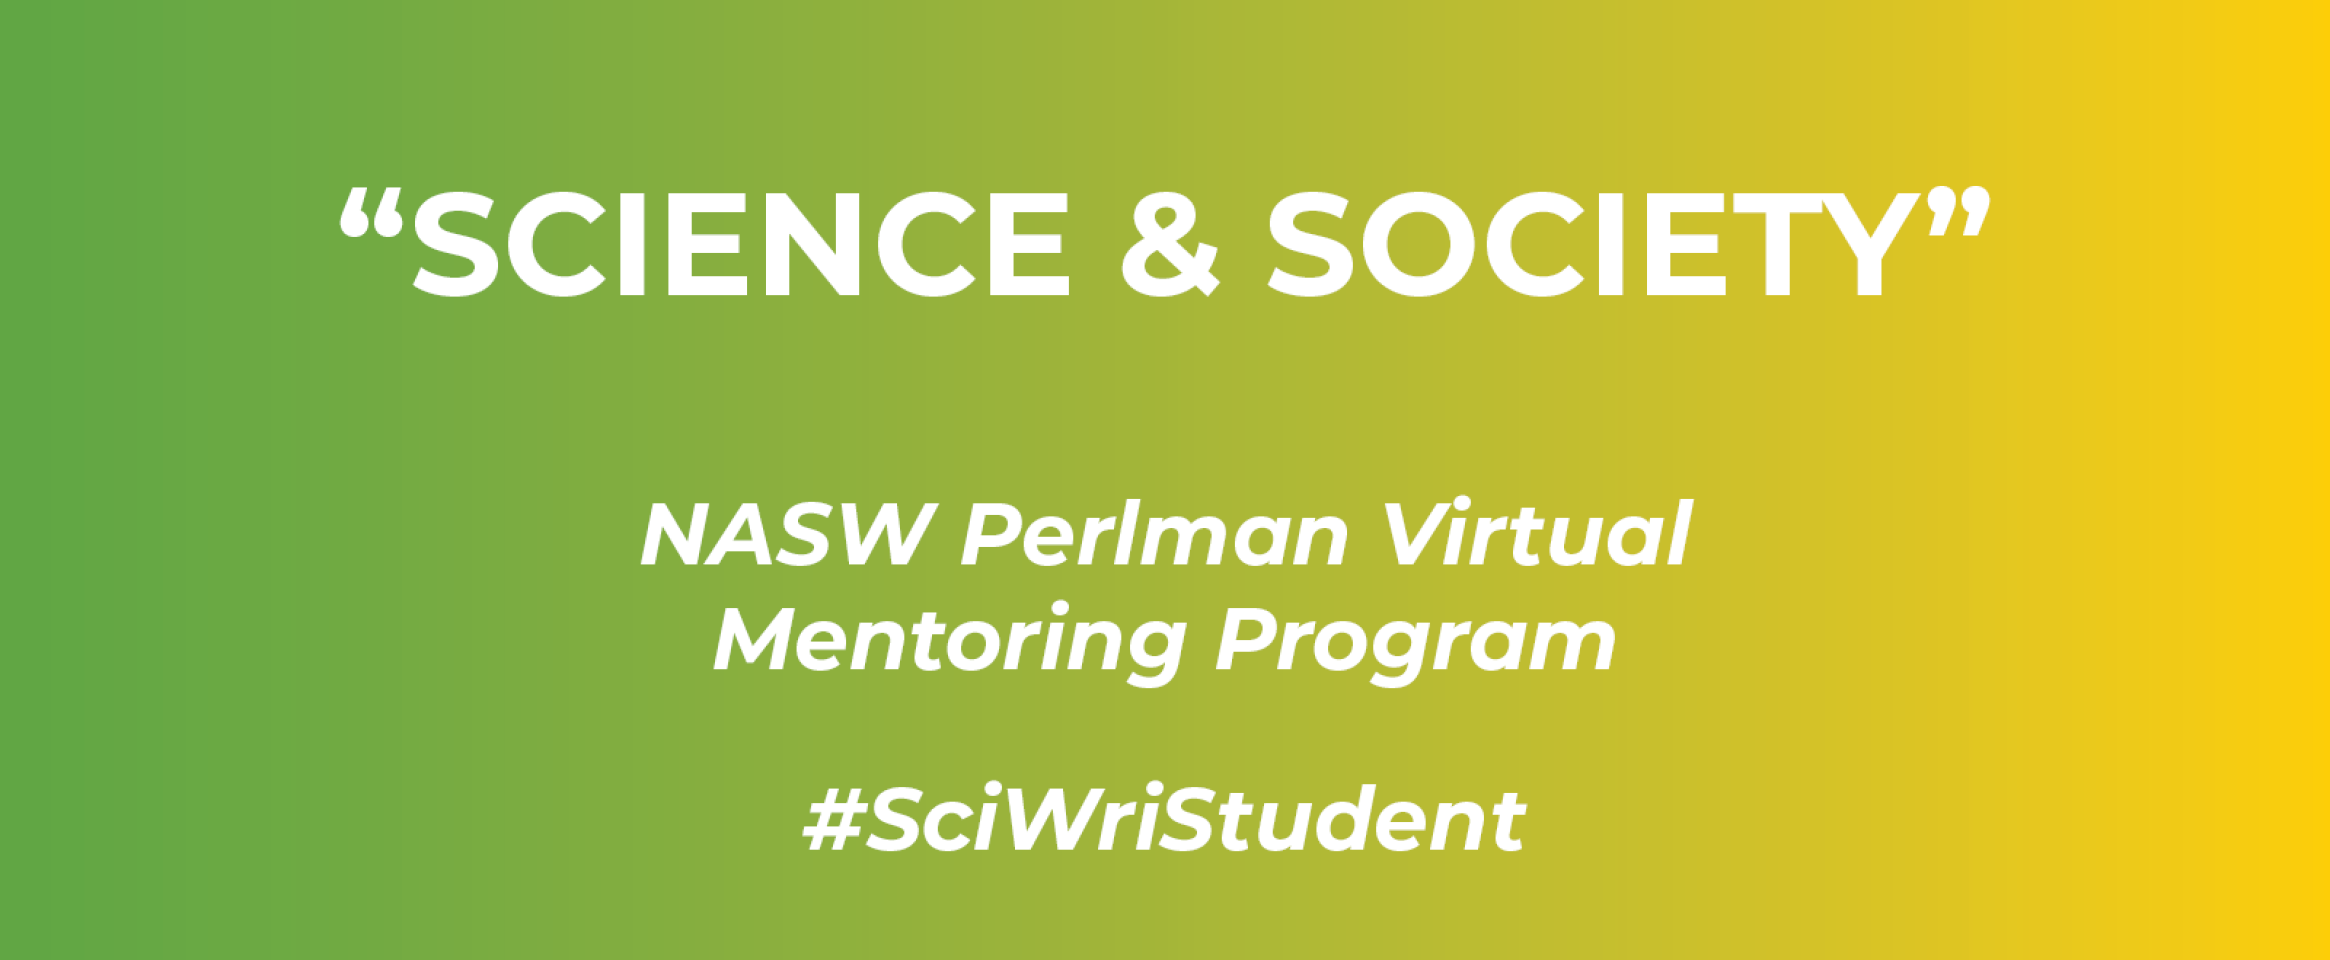 Horizontal graphic with text Science & Society and N A S W Perlman Virtual Mentoring Program, and hashtag Sci Wri Student